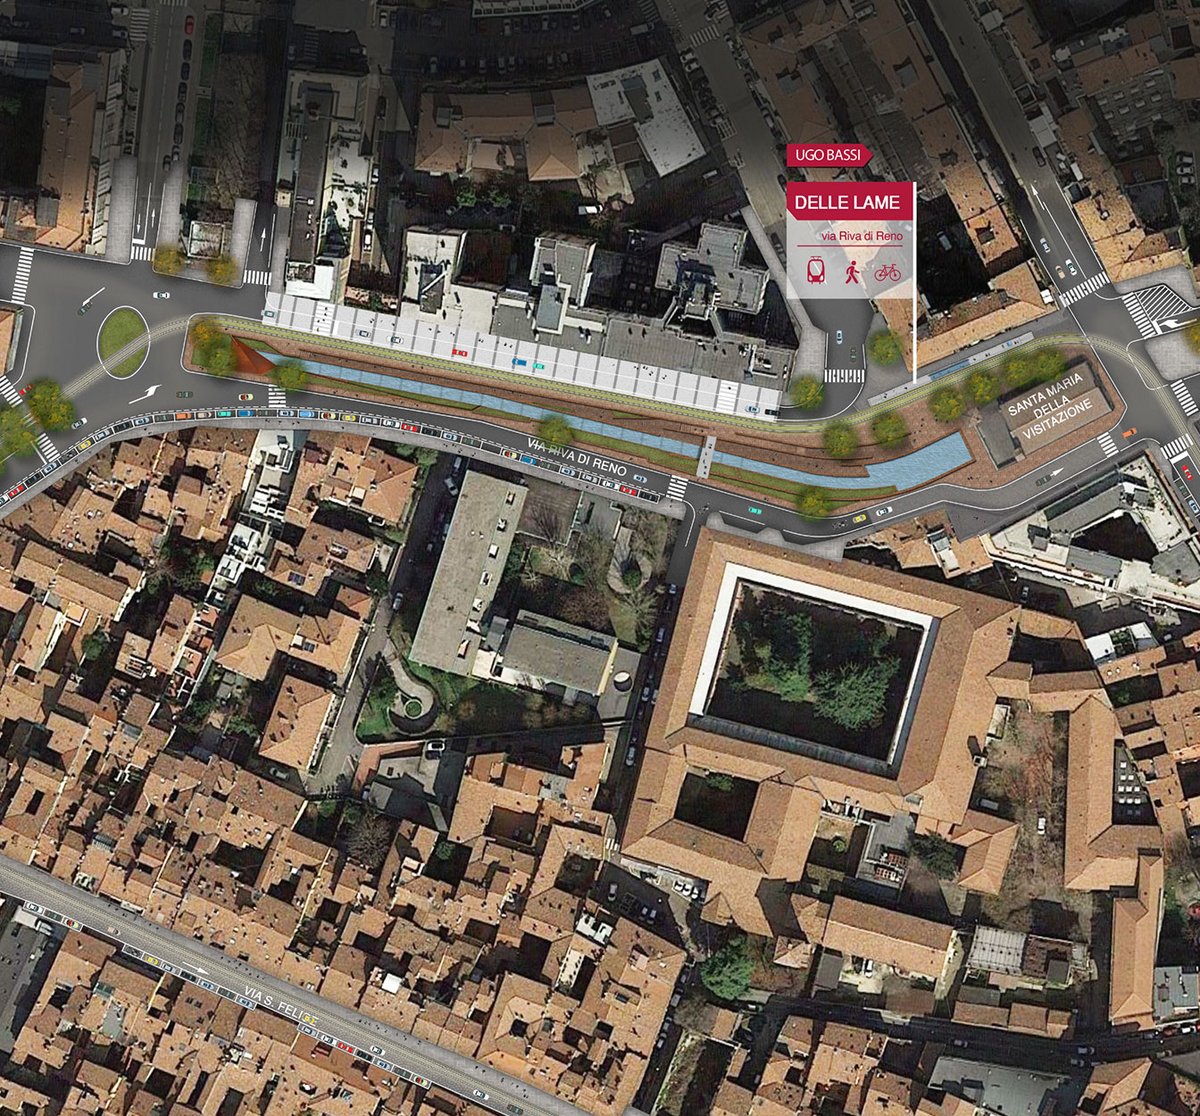 I could add that there are other costs not directly related to the transit project itself but are accounted for in the budget: a short section of the canal in the city center will be opened up and redesigned together with the tramway. This will cost 3.2m€